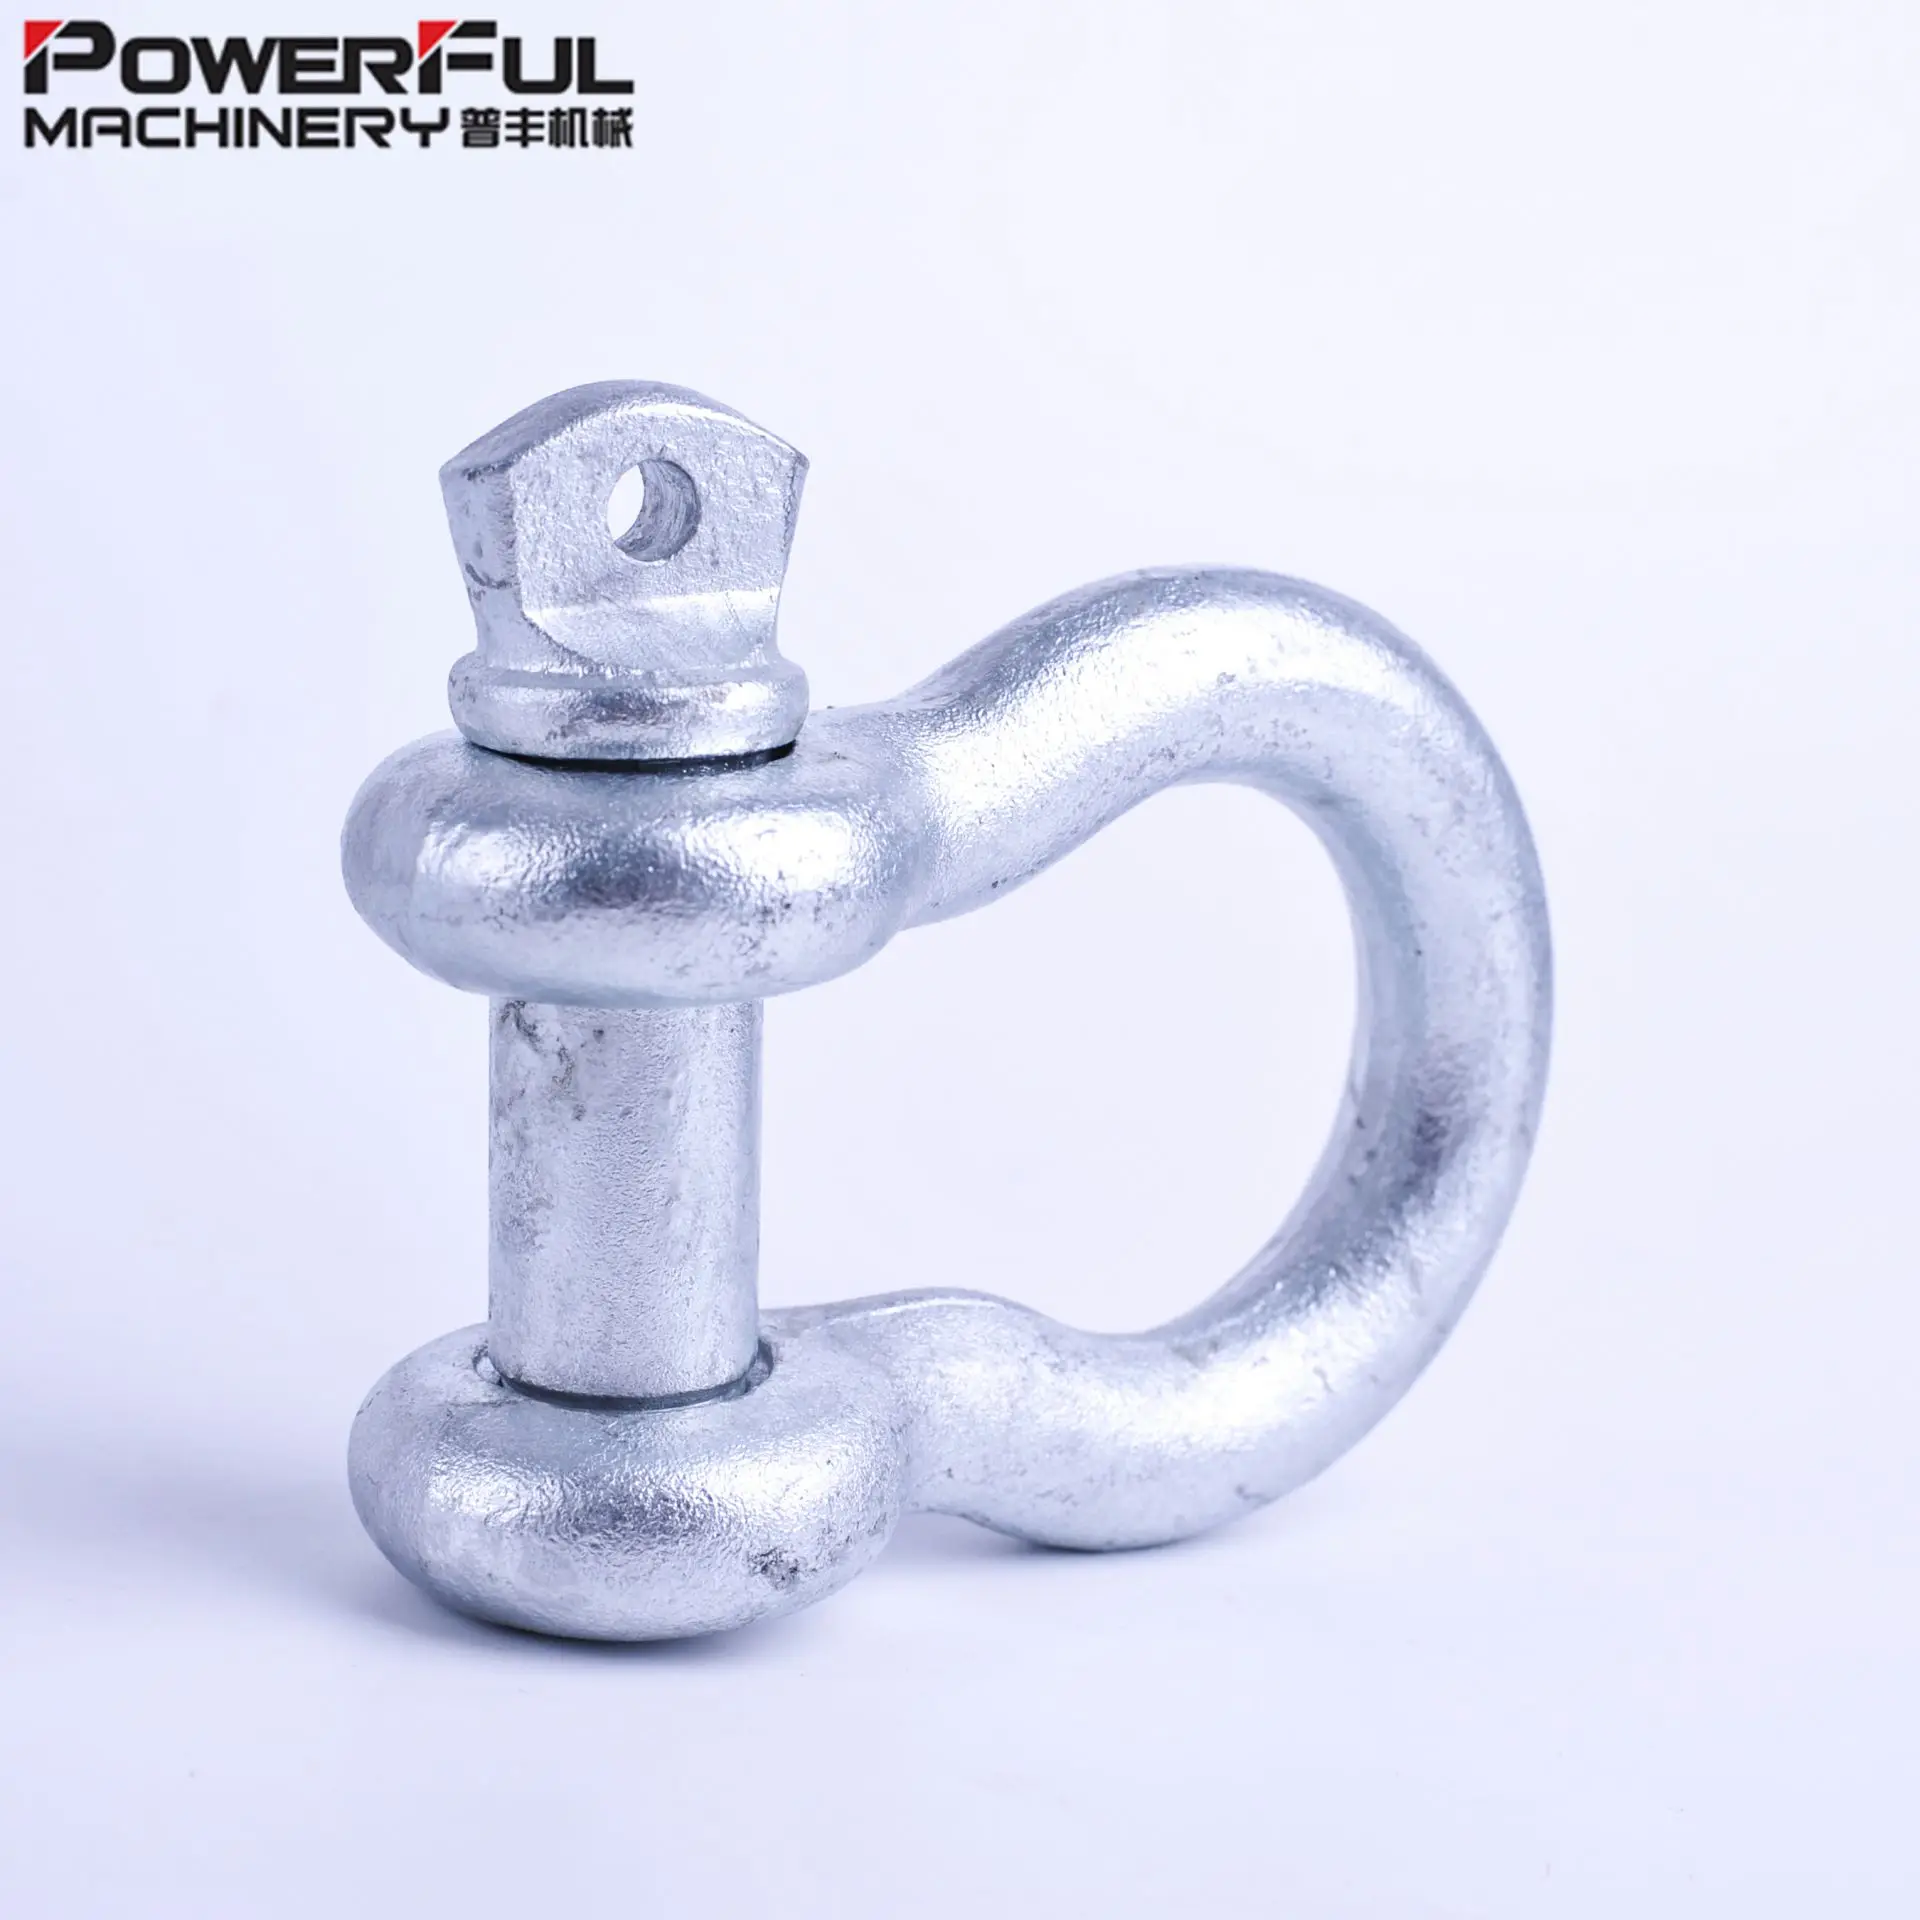 U.S. type G209 Electro Galvanized Shackle 4 Times Safety Factor